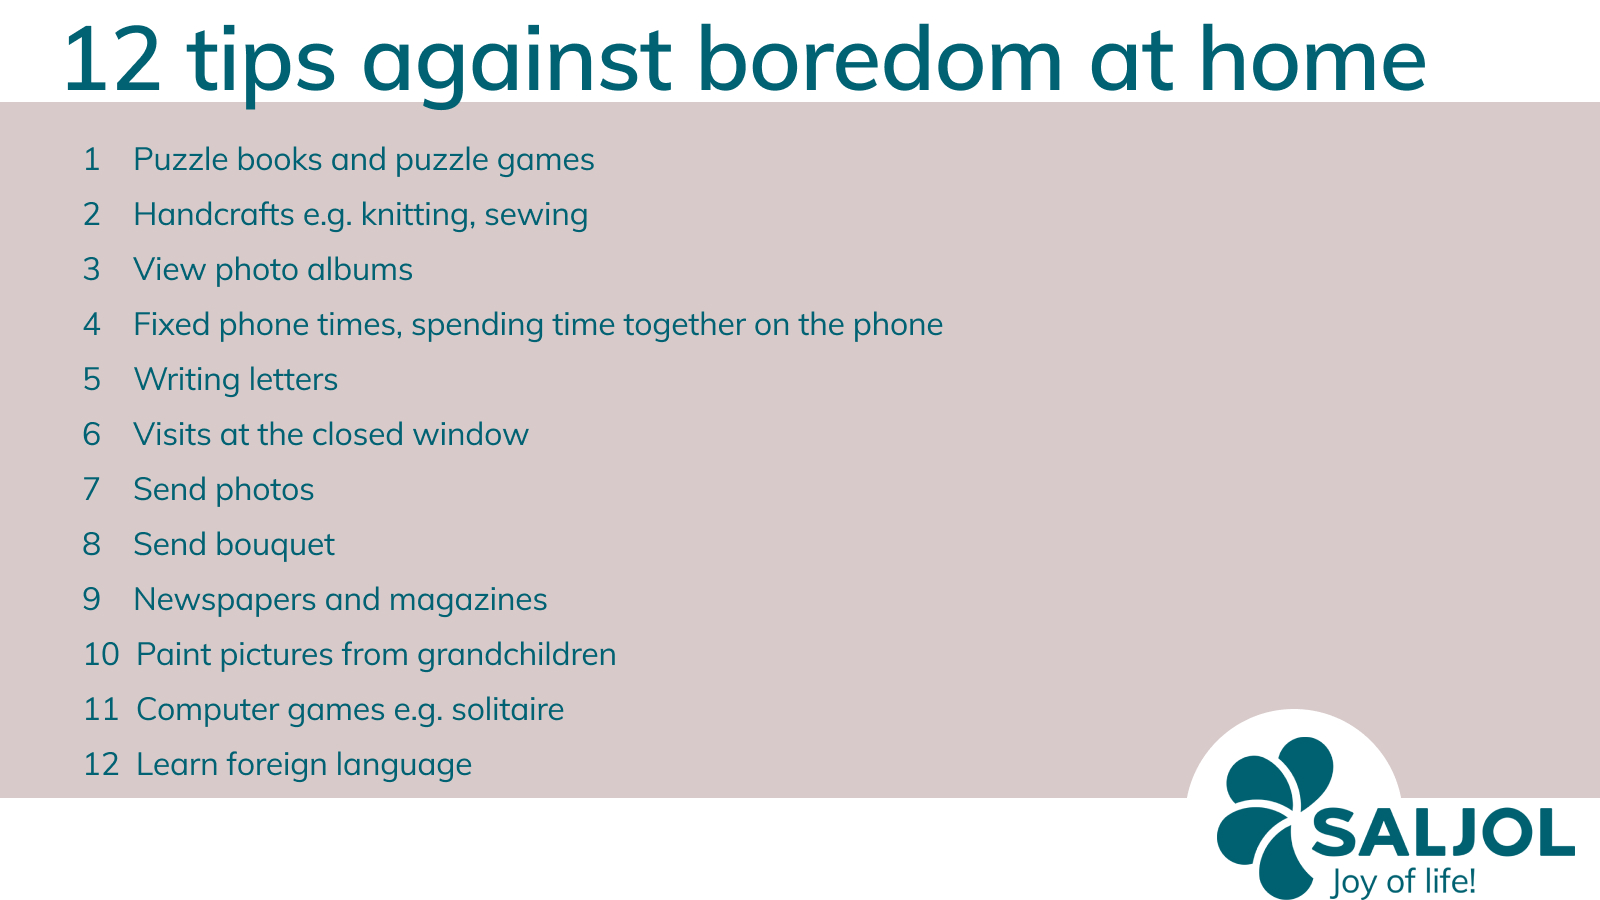 12 tips against boredom at home